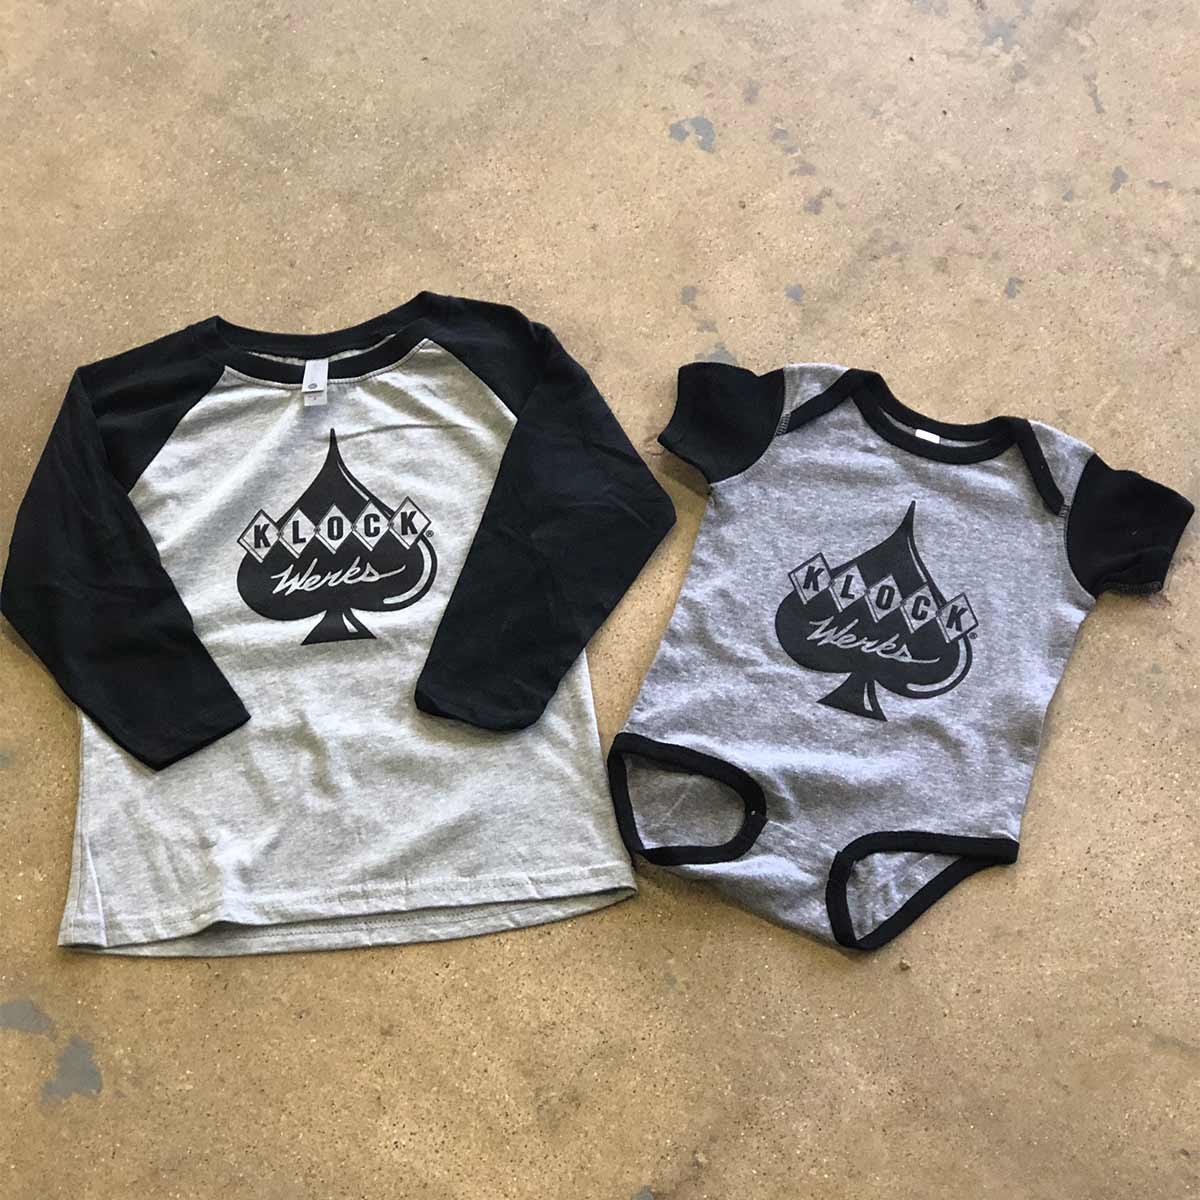 Klassic Logo Youth 3/4 Sleeve Klassic Logo Youth 3/4 Sleeve and matching Onesie's available too